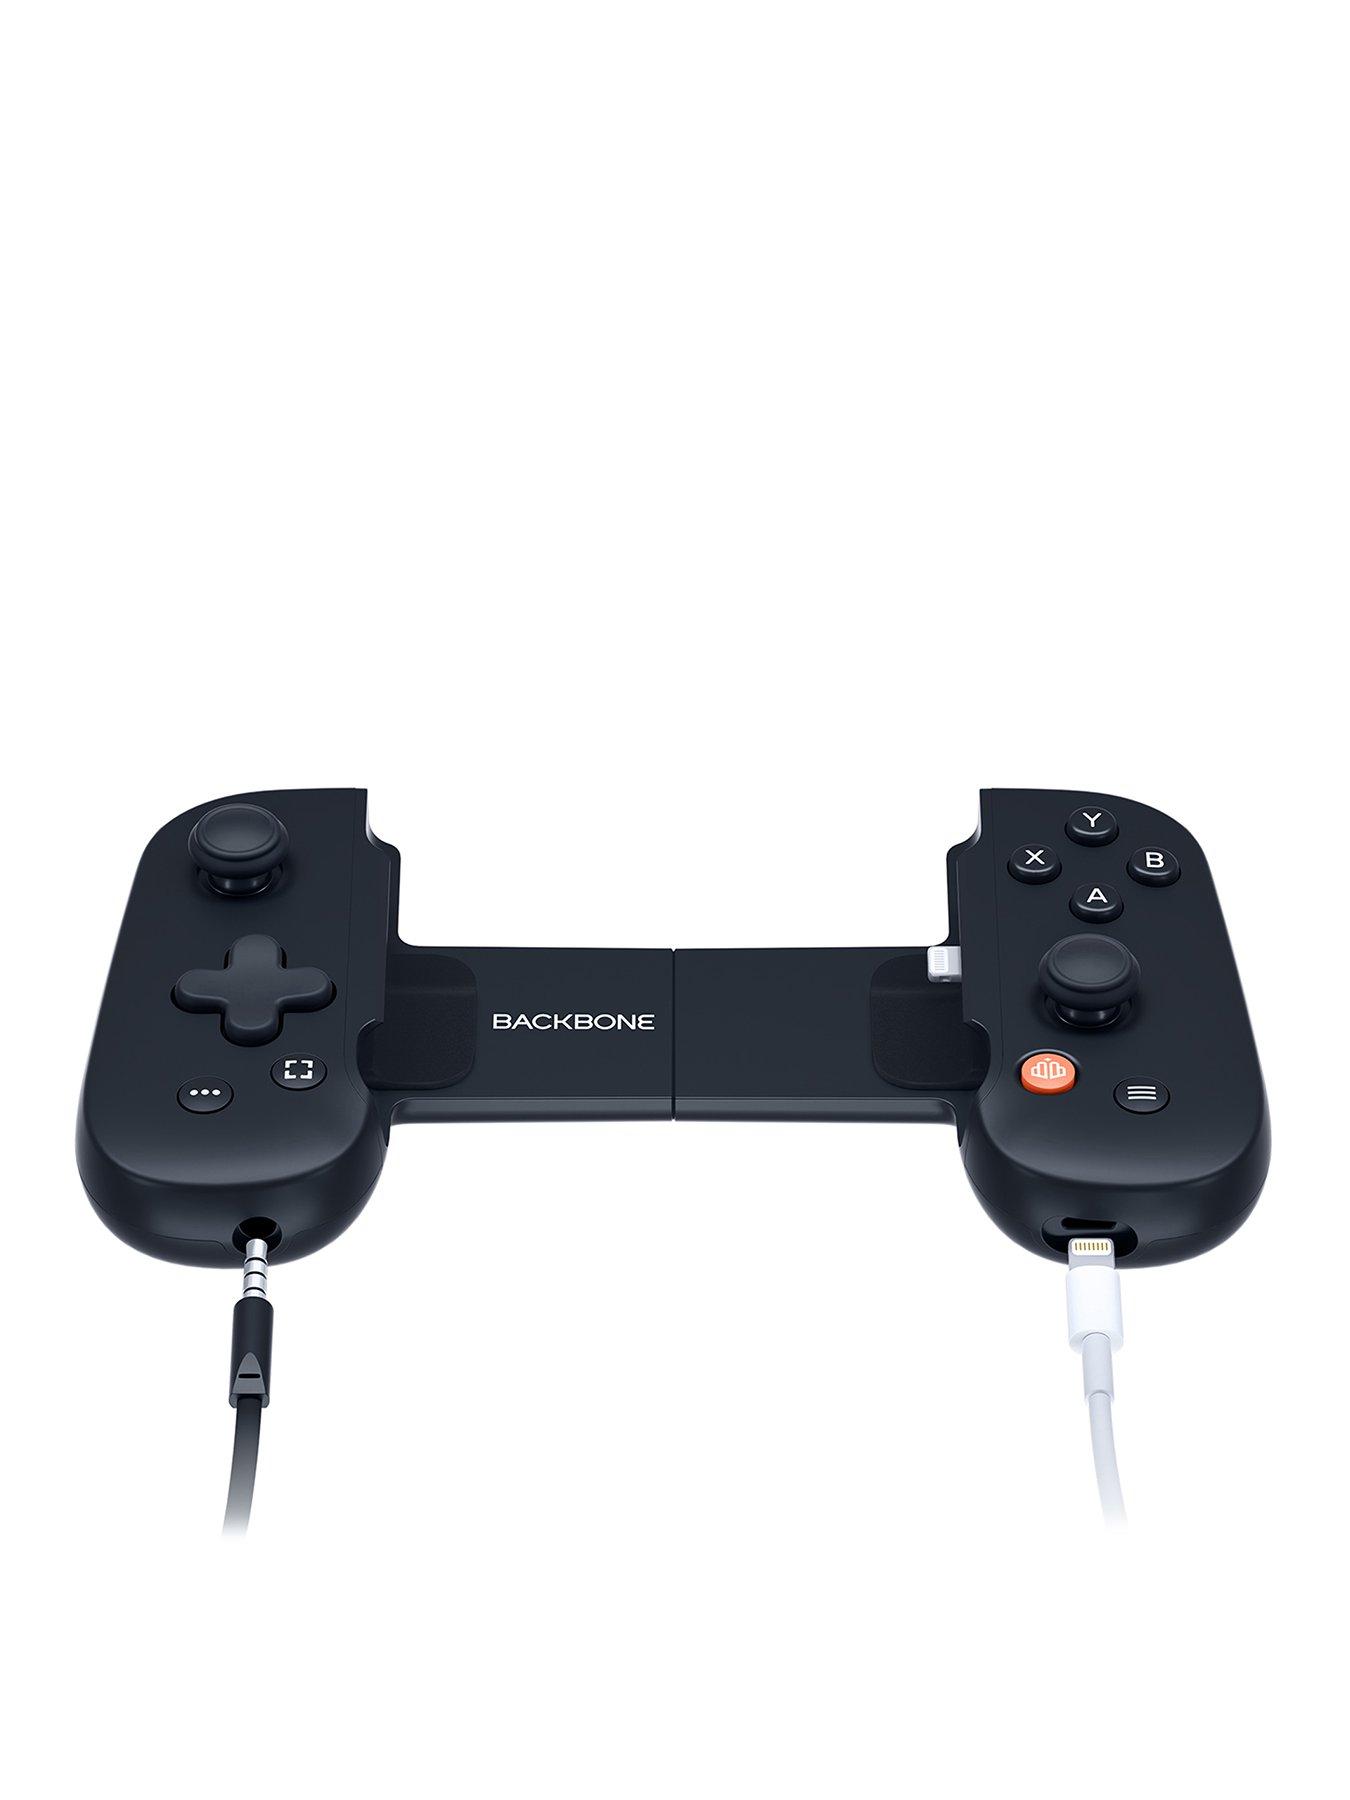 The Backbone One: An Excellent Controller For Mobile Gaming, by Aiden  (Illumination Gaming), ILLUMINATION